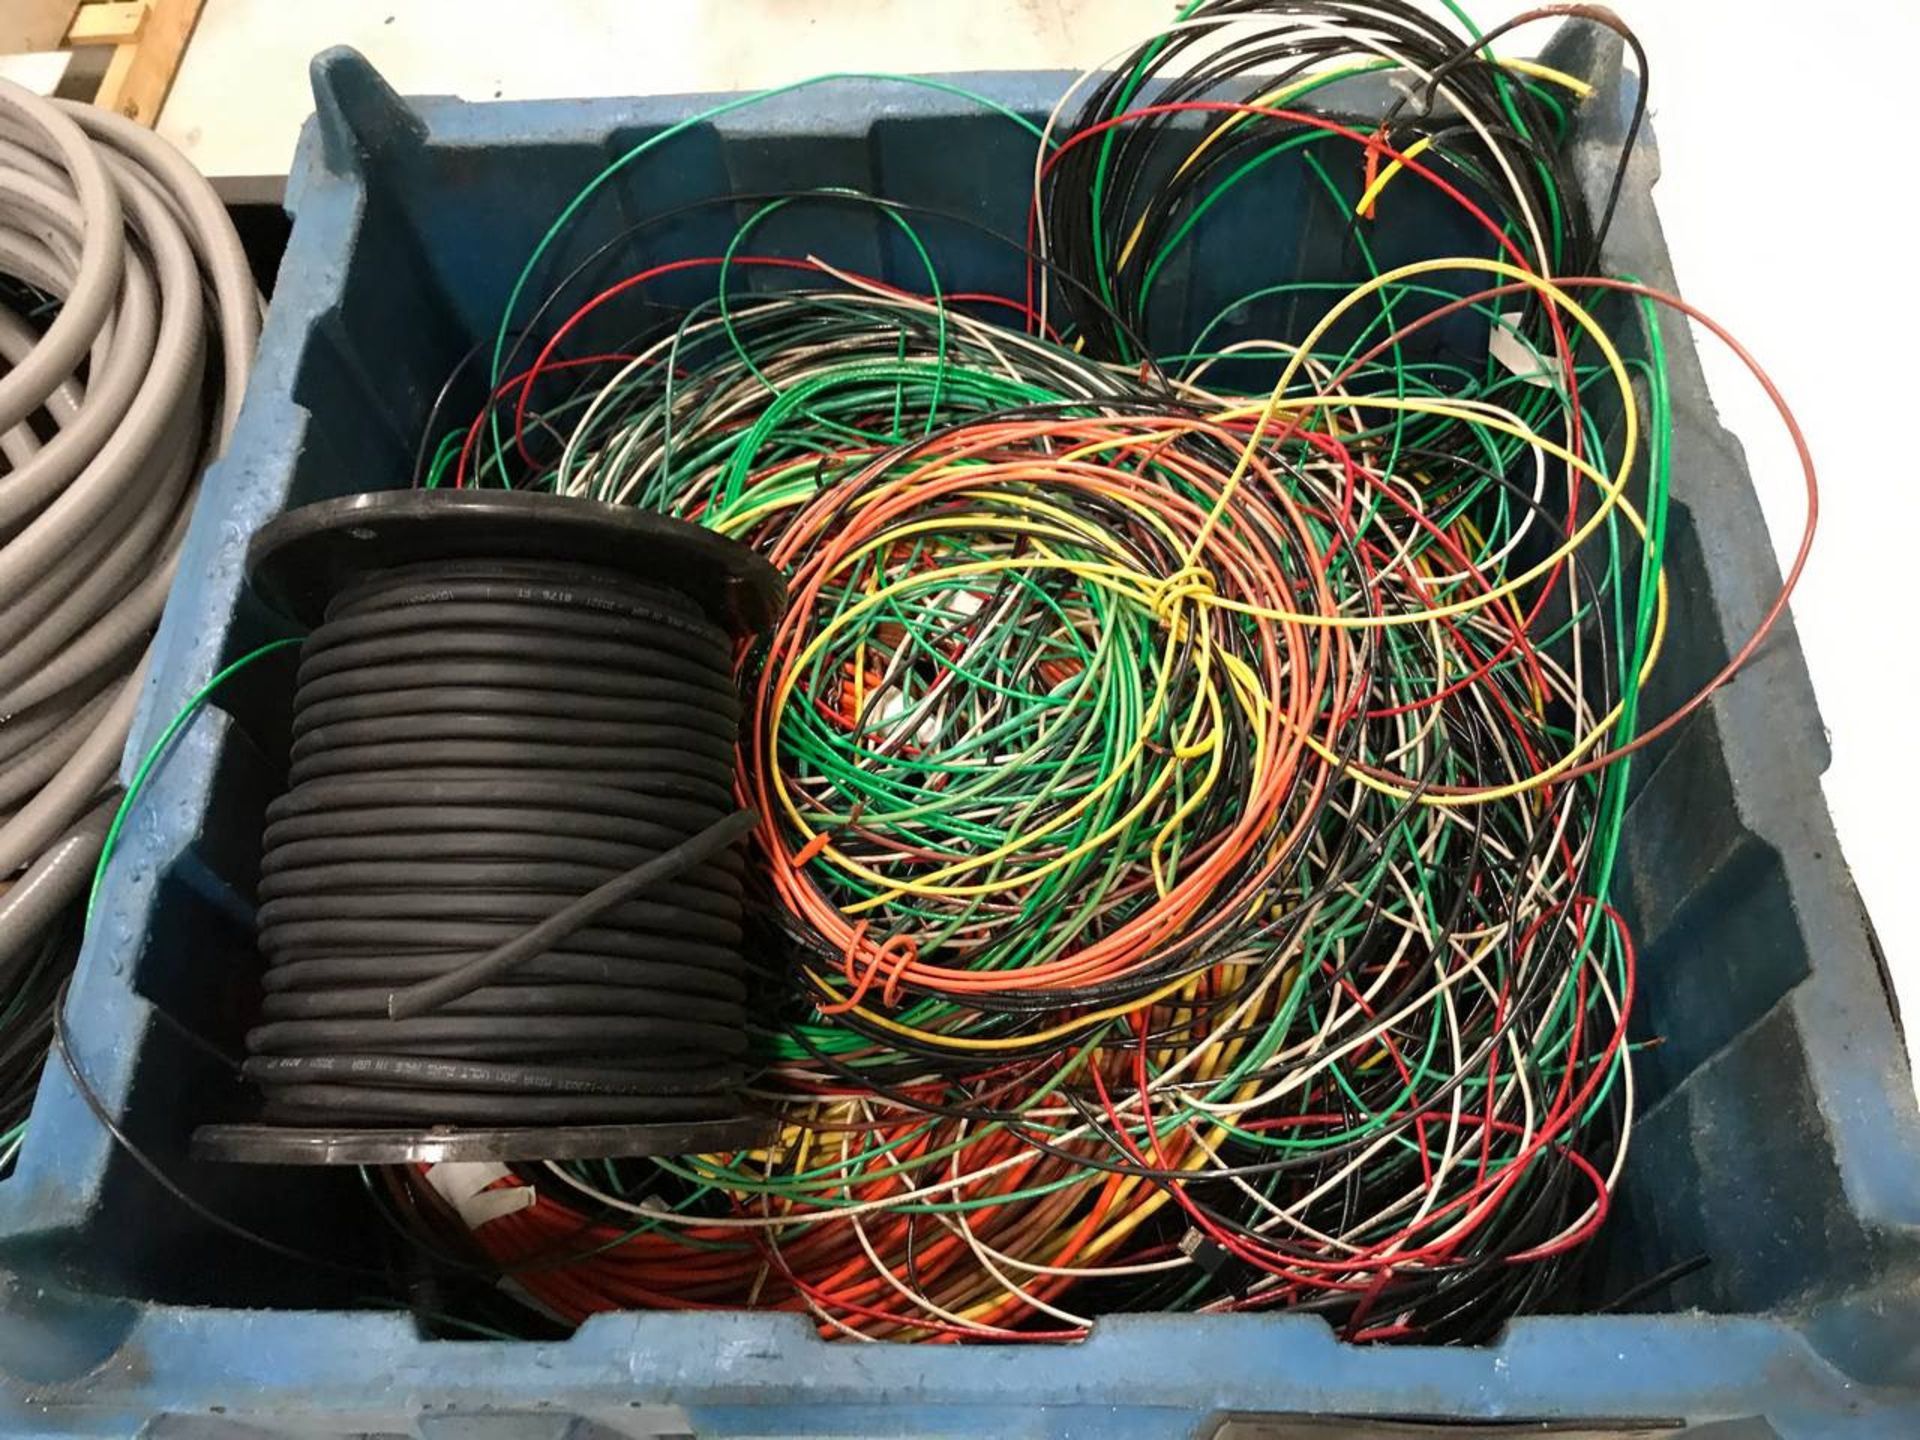 Lot of Misc. Hoses and Copper Wire - Image 2 of 4